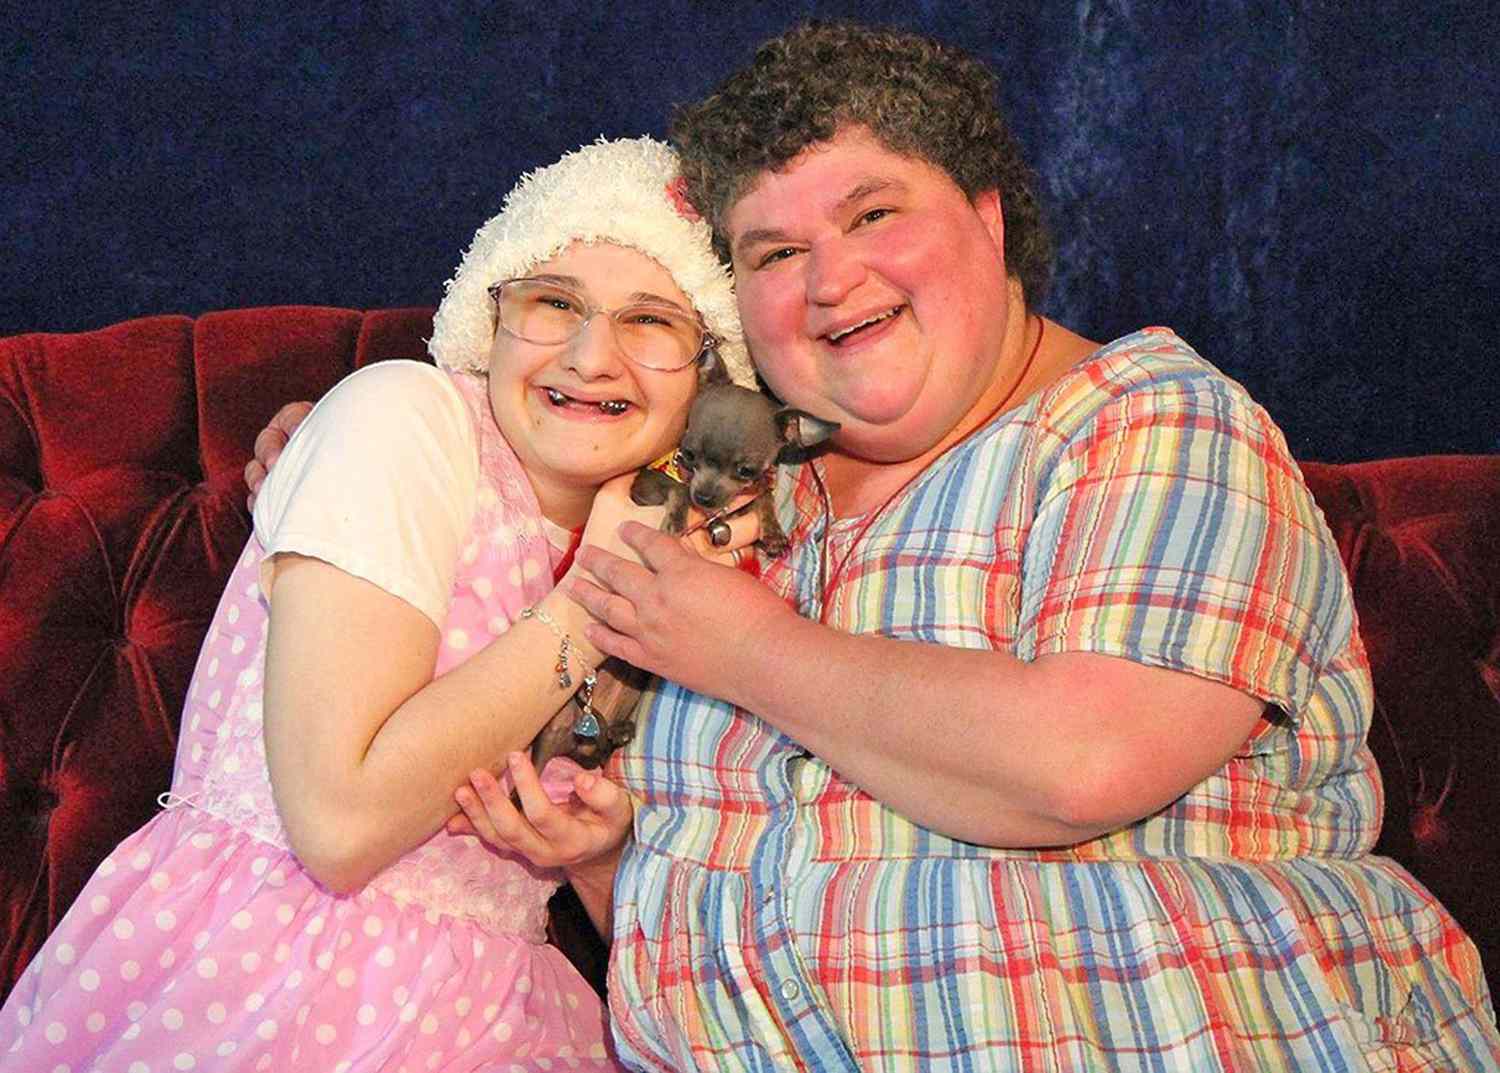 Gypsy Rose Blanchard Opens Up About Life In Prison And Mother’s Murder